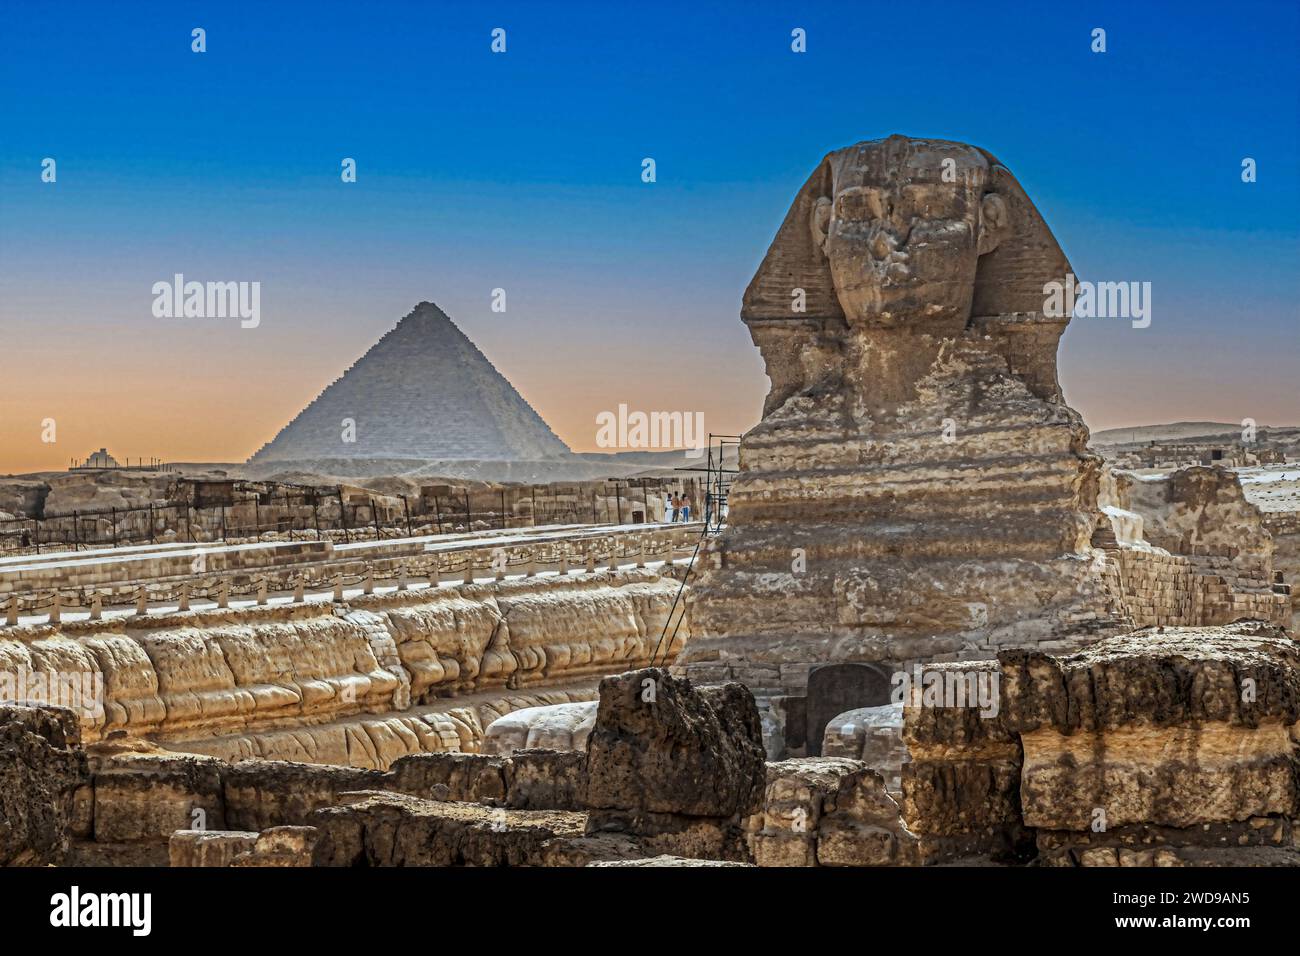 View with the Great Sphinx of Giza, near the site of the Great Pyramids of the Giza Necropolis. Al Haram, Giza Governorate, Egypt, Africa. Stock Photo